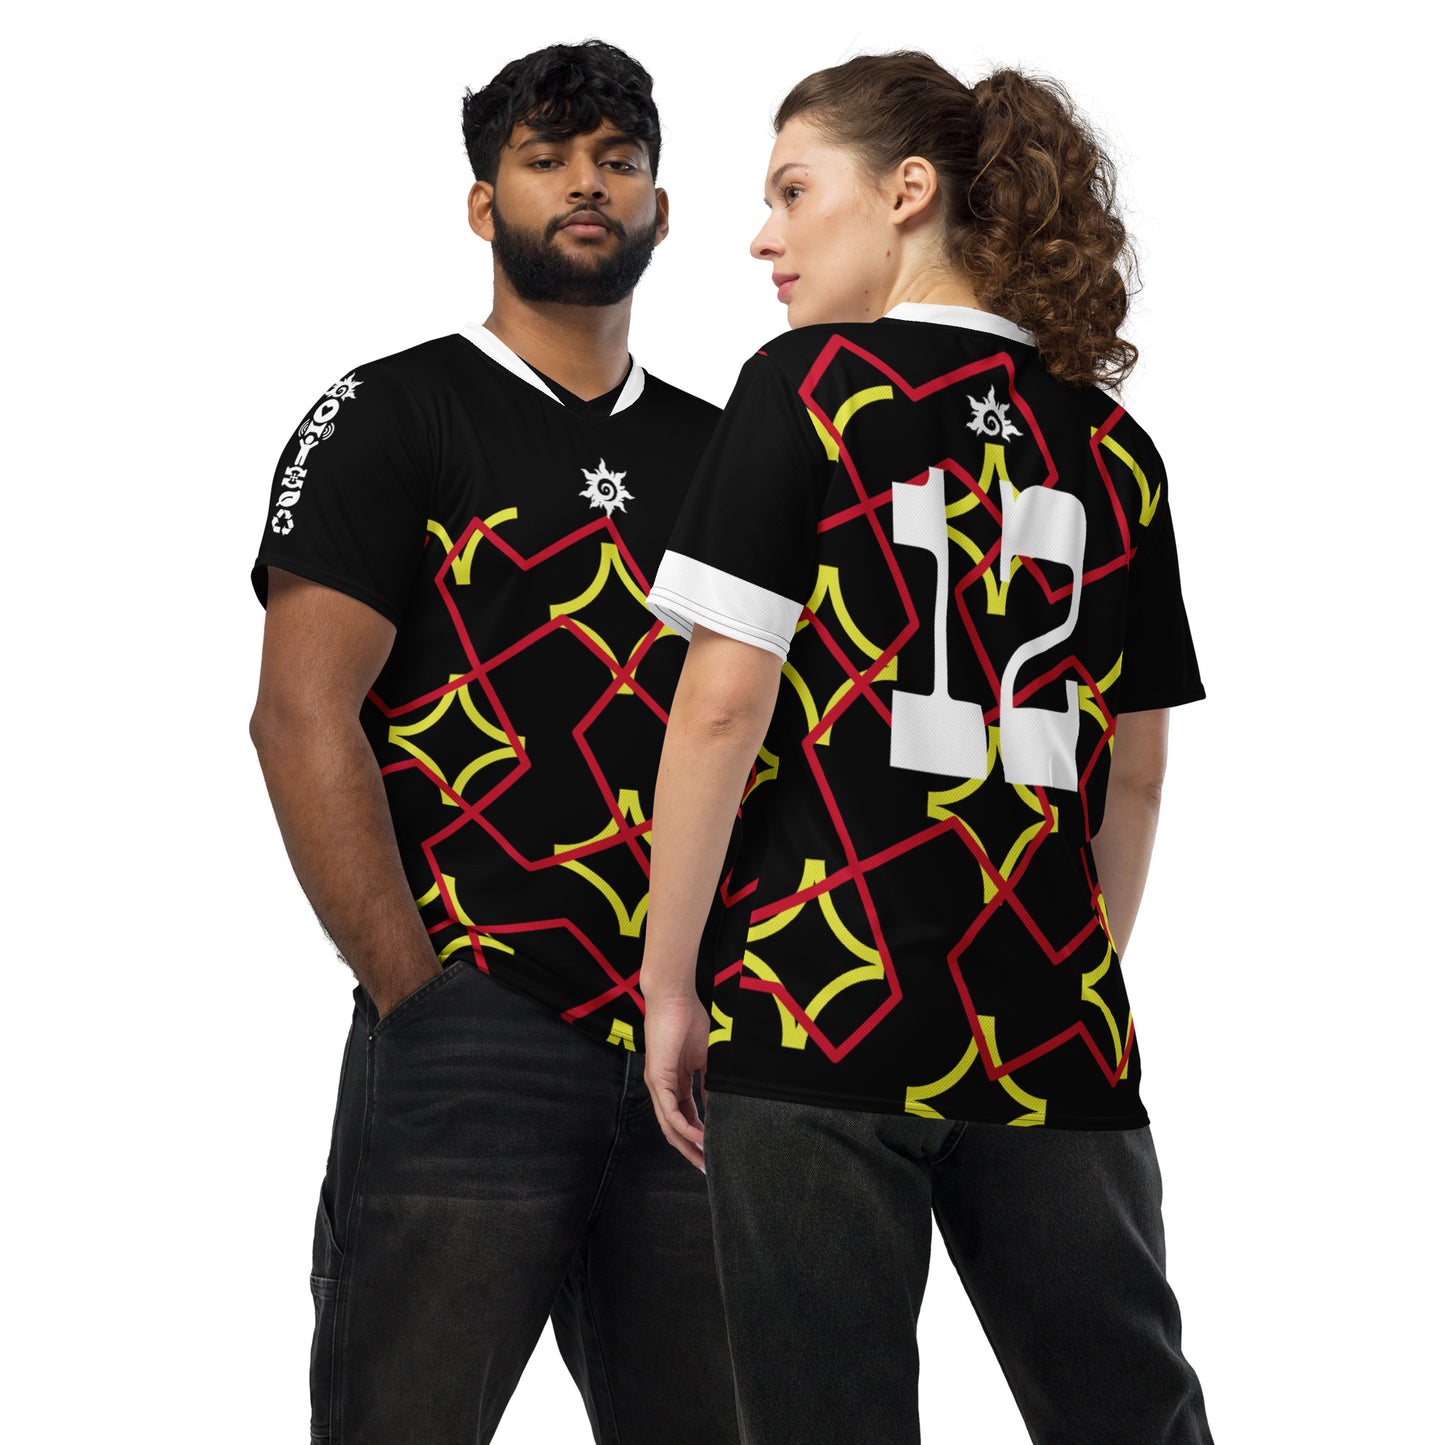 Recycled Unisex sports jersey ActSun 1